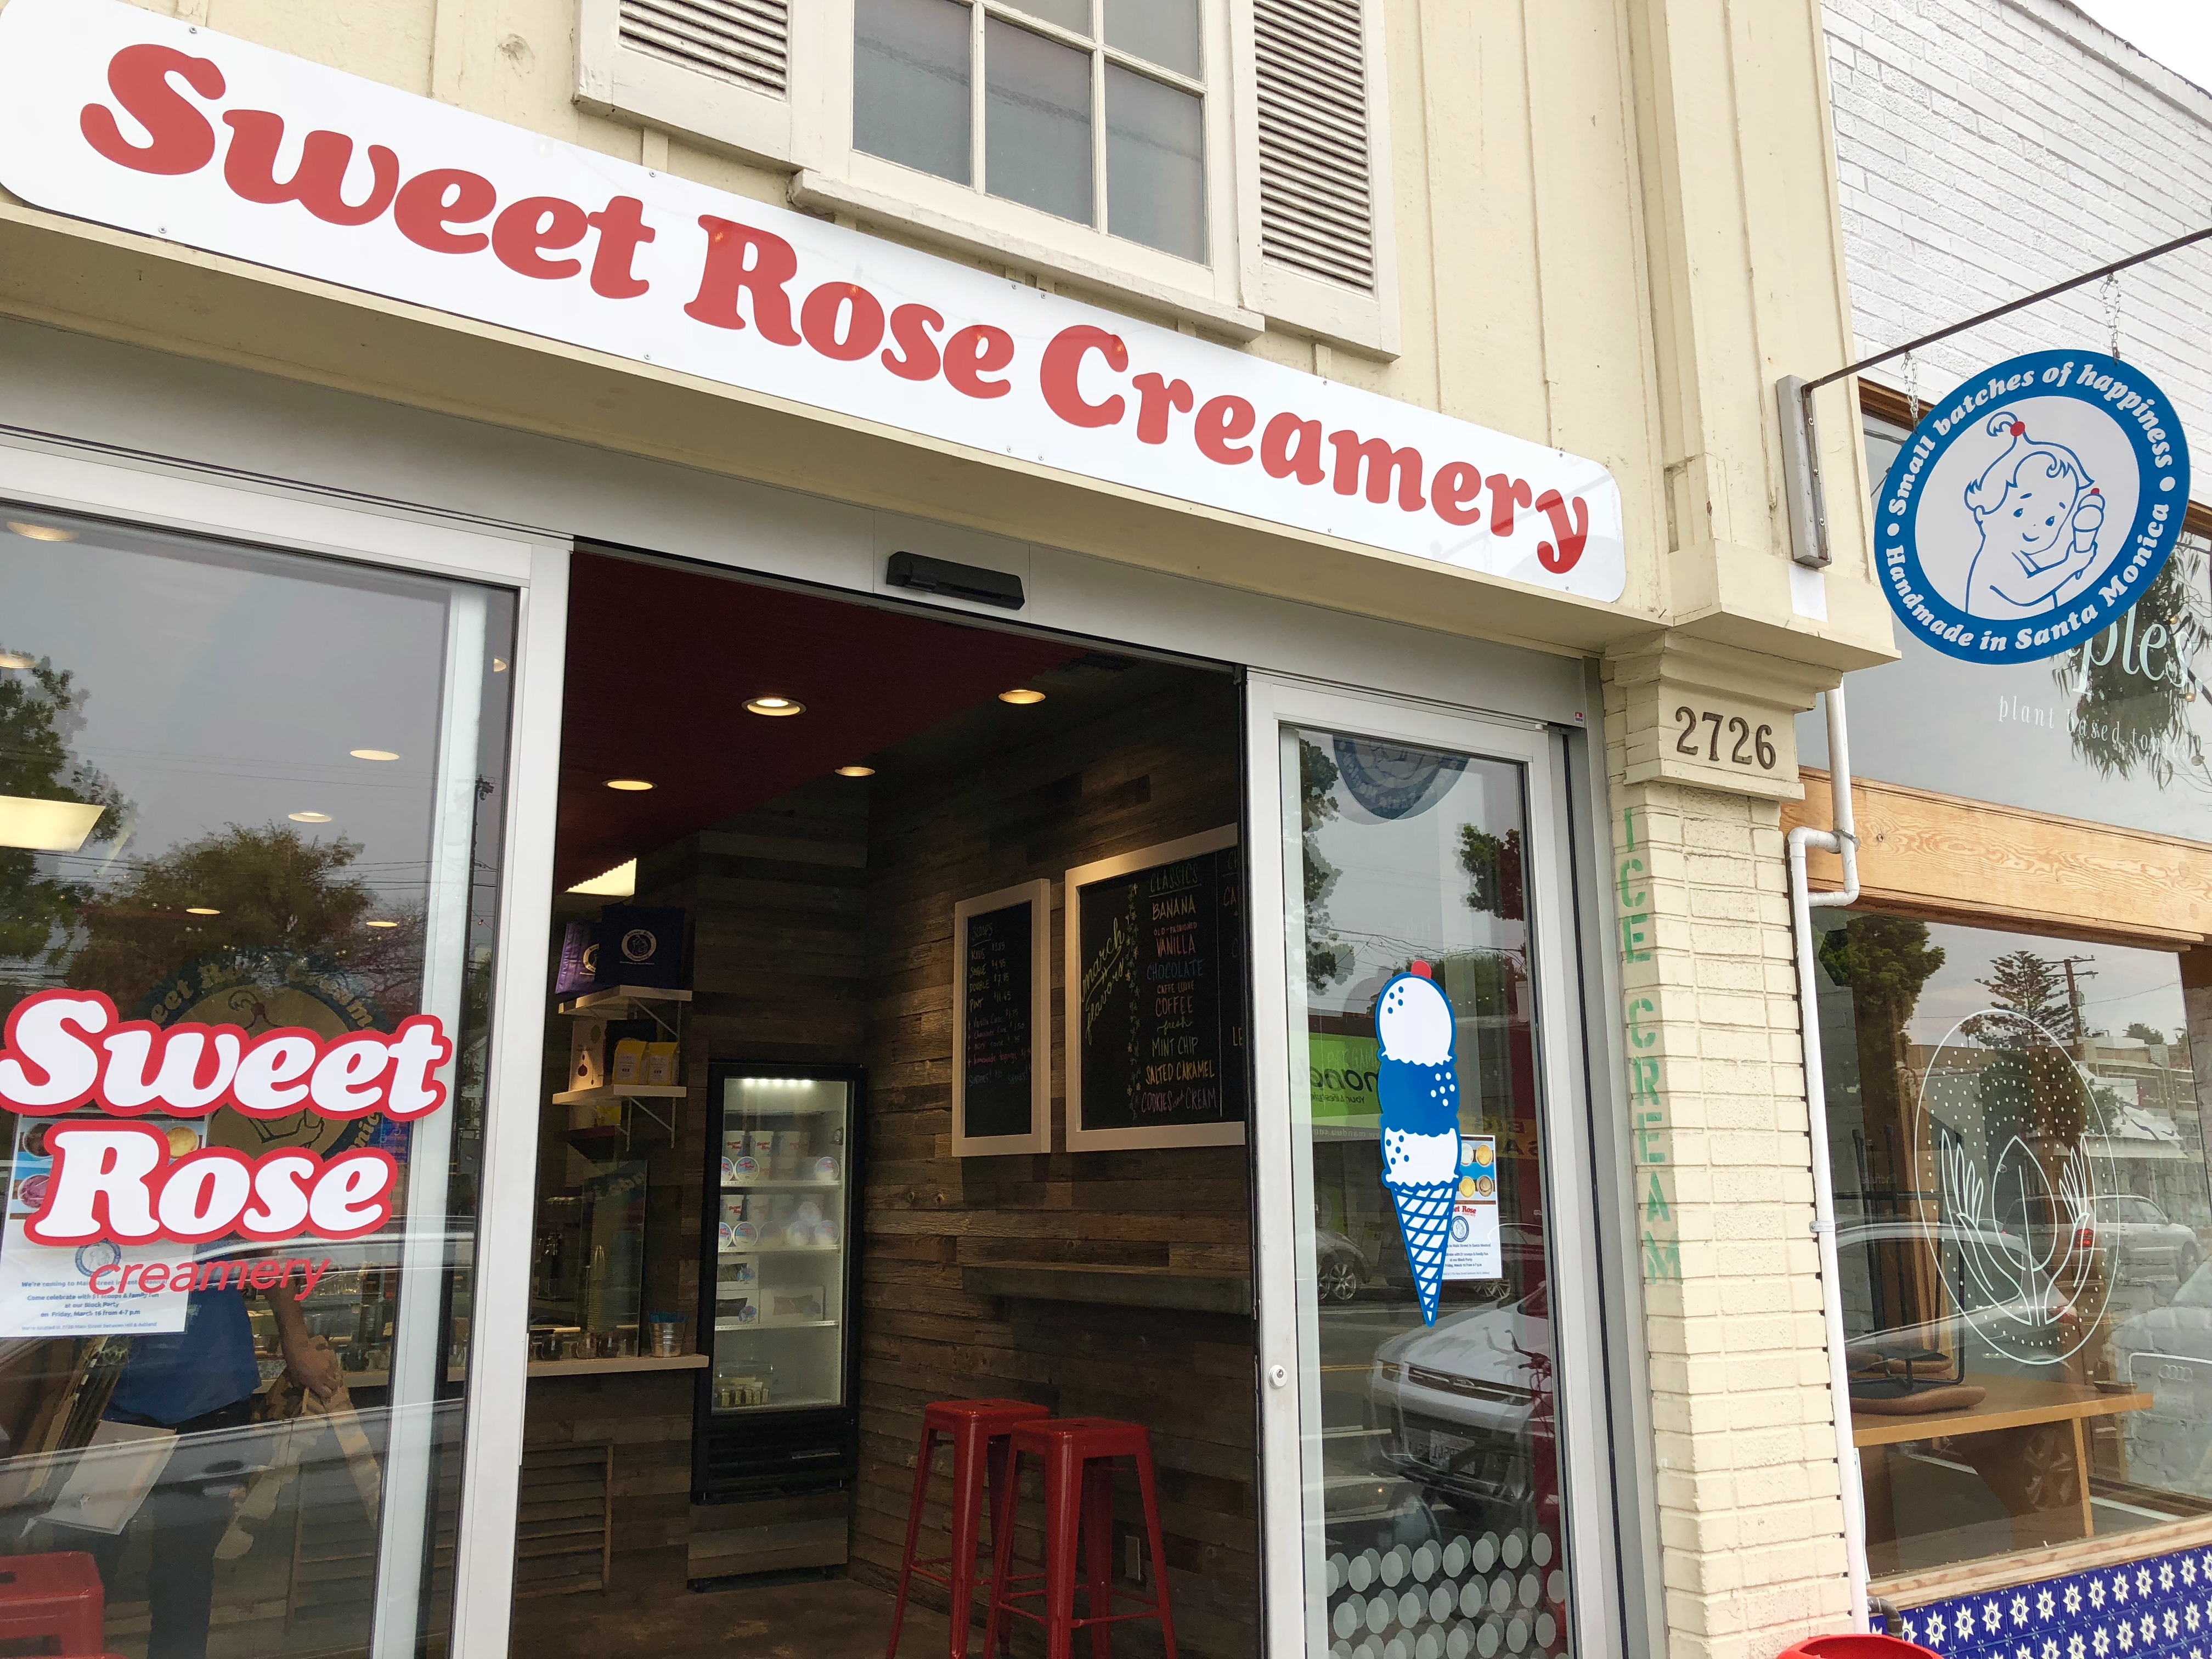 The exterior of an ice cream shop, Sweet Rose Creamery in Santa Monica.